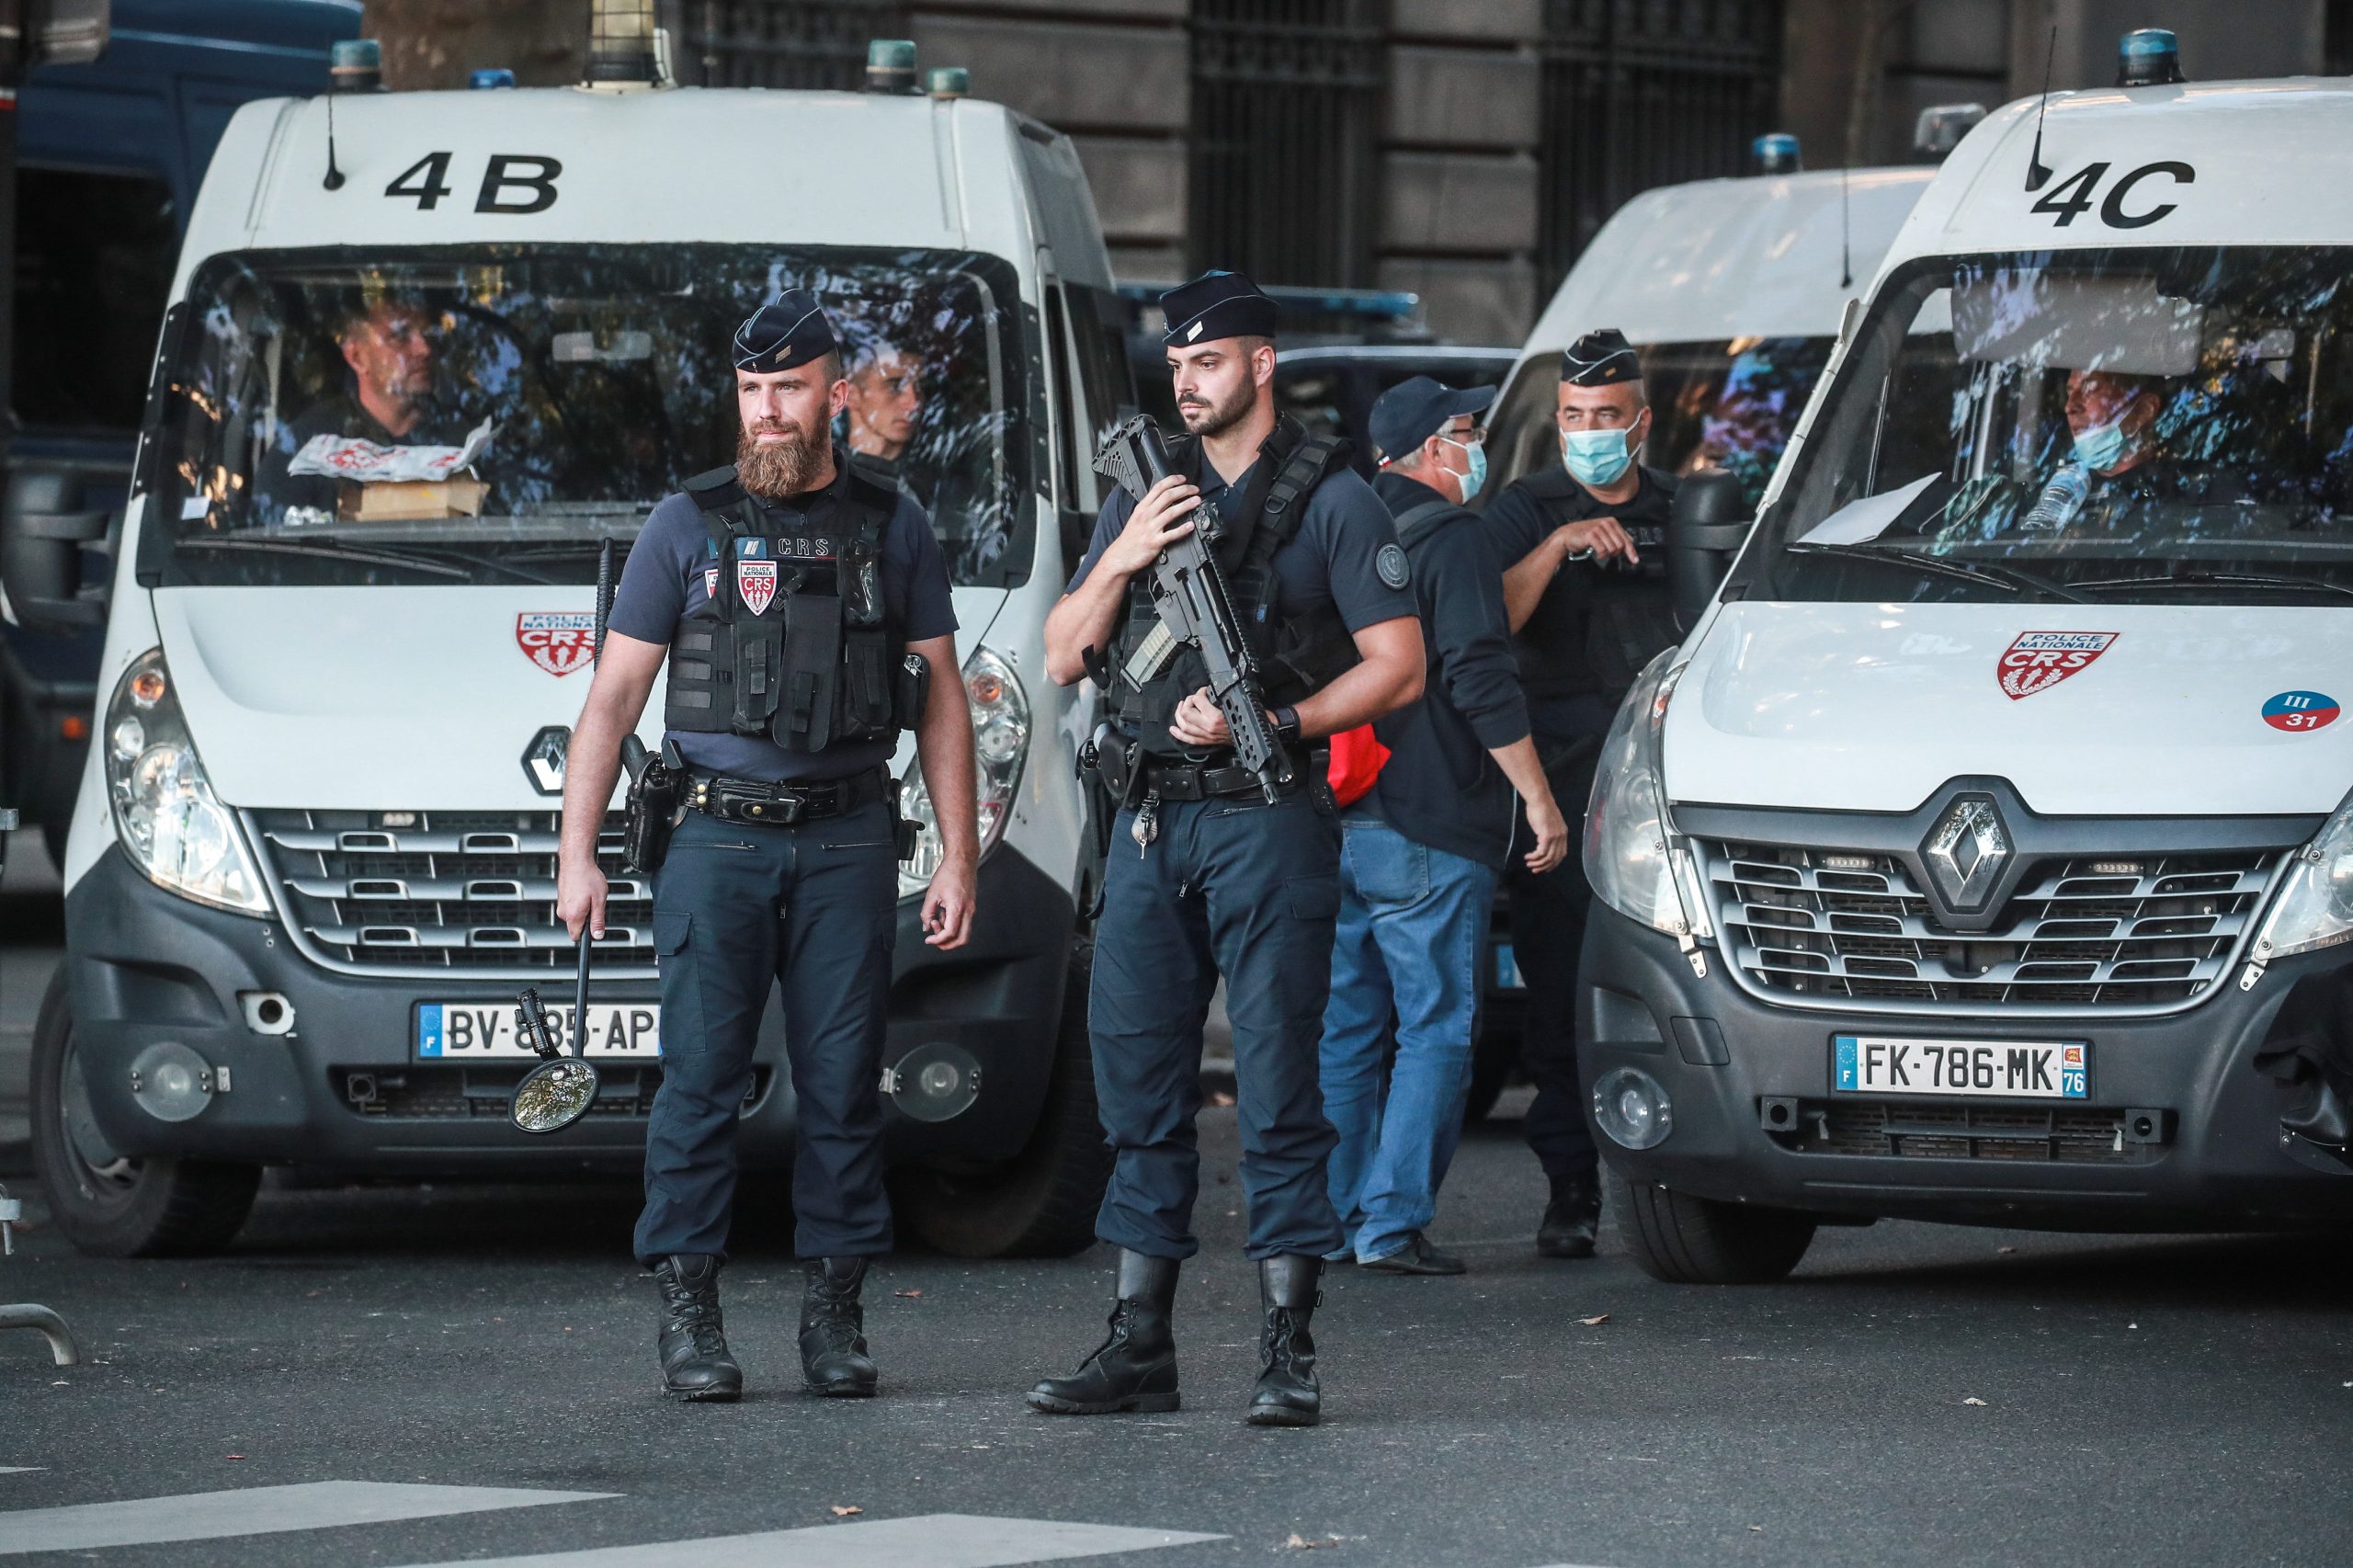 epa09455039 French police officers secure the Courthouse before the arrival of the convoy transporting Salah Abdeslam and other members of the commando accused of being involved in the 2015 Paris attacks, outside the Paris courthouse, in Paris, France, 08 September 2021. The trial over the 13 November 2015 terrorist attacks is set to begin on 08 September and will last nine months. 130 people were killed and hundreds were injured in a series of coordinated attacks targeting the Bataclan concert hall, the Stade de France national sports stadium, and several restaurants and bars.  EPA/CHRISTOPHE PETIT TESSON